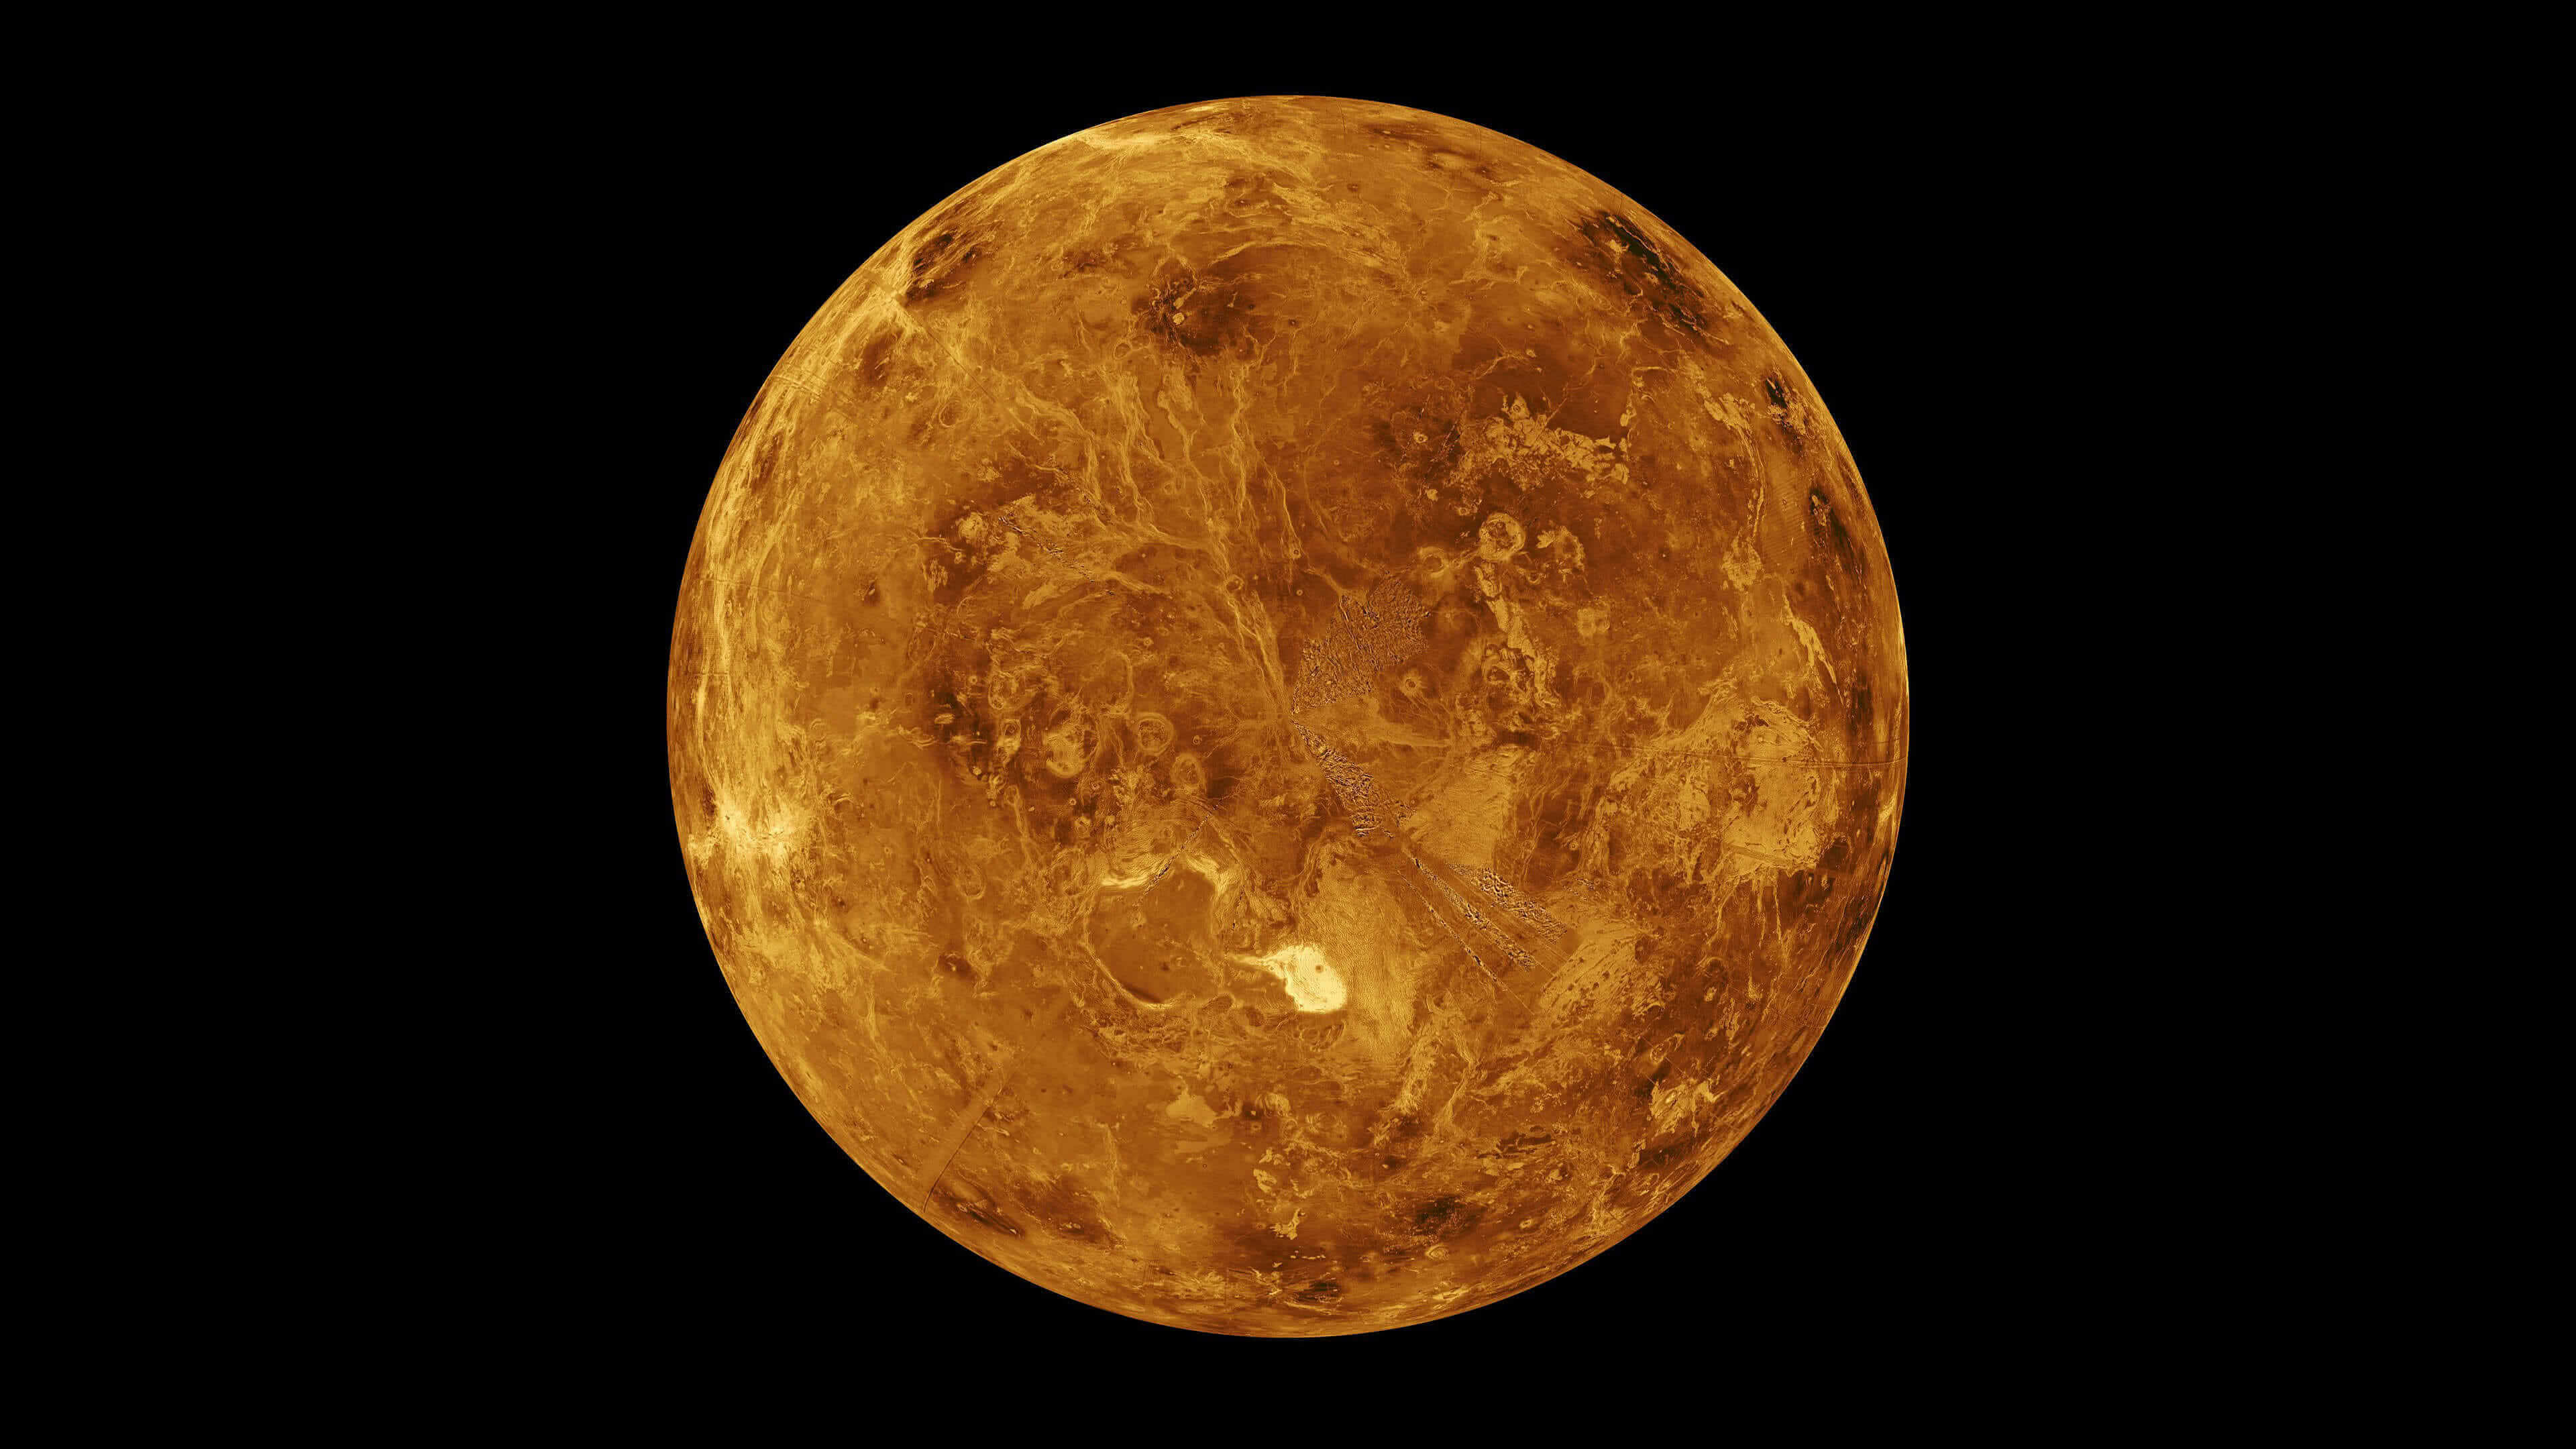 Venus: The second planet from the Sun, Galaxy, Universe, Cosmos. 3840x2160 4K Background.